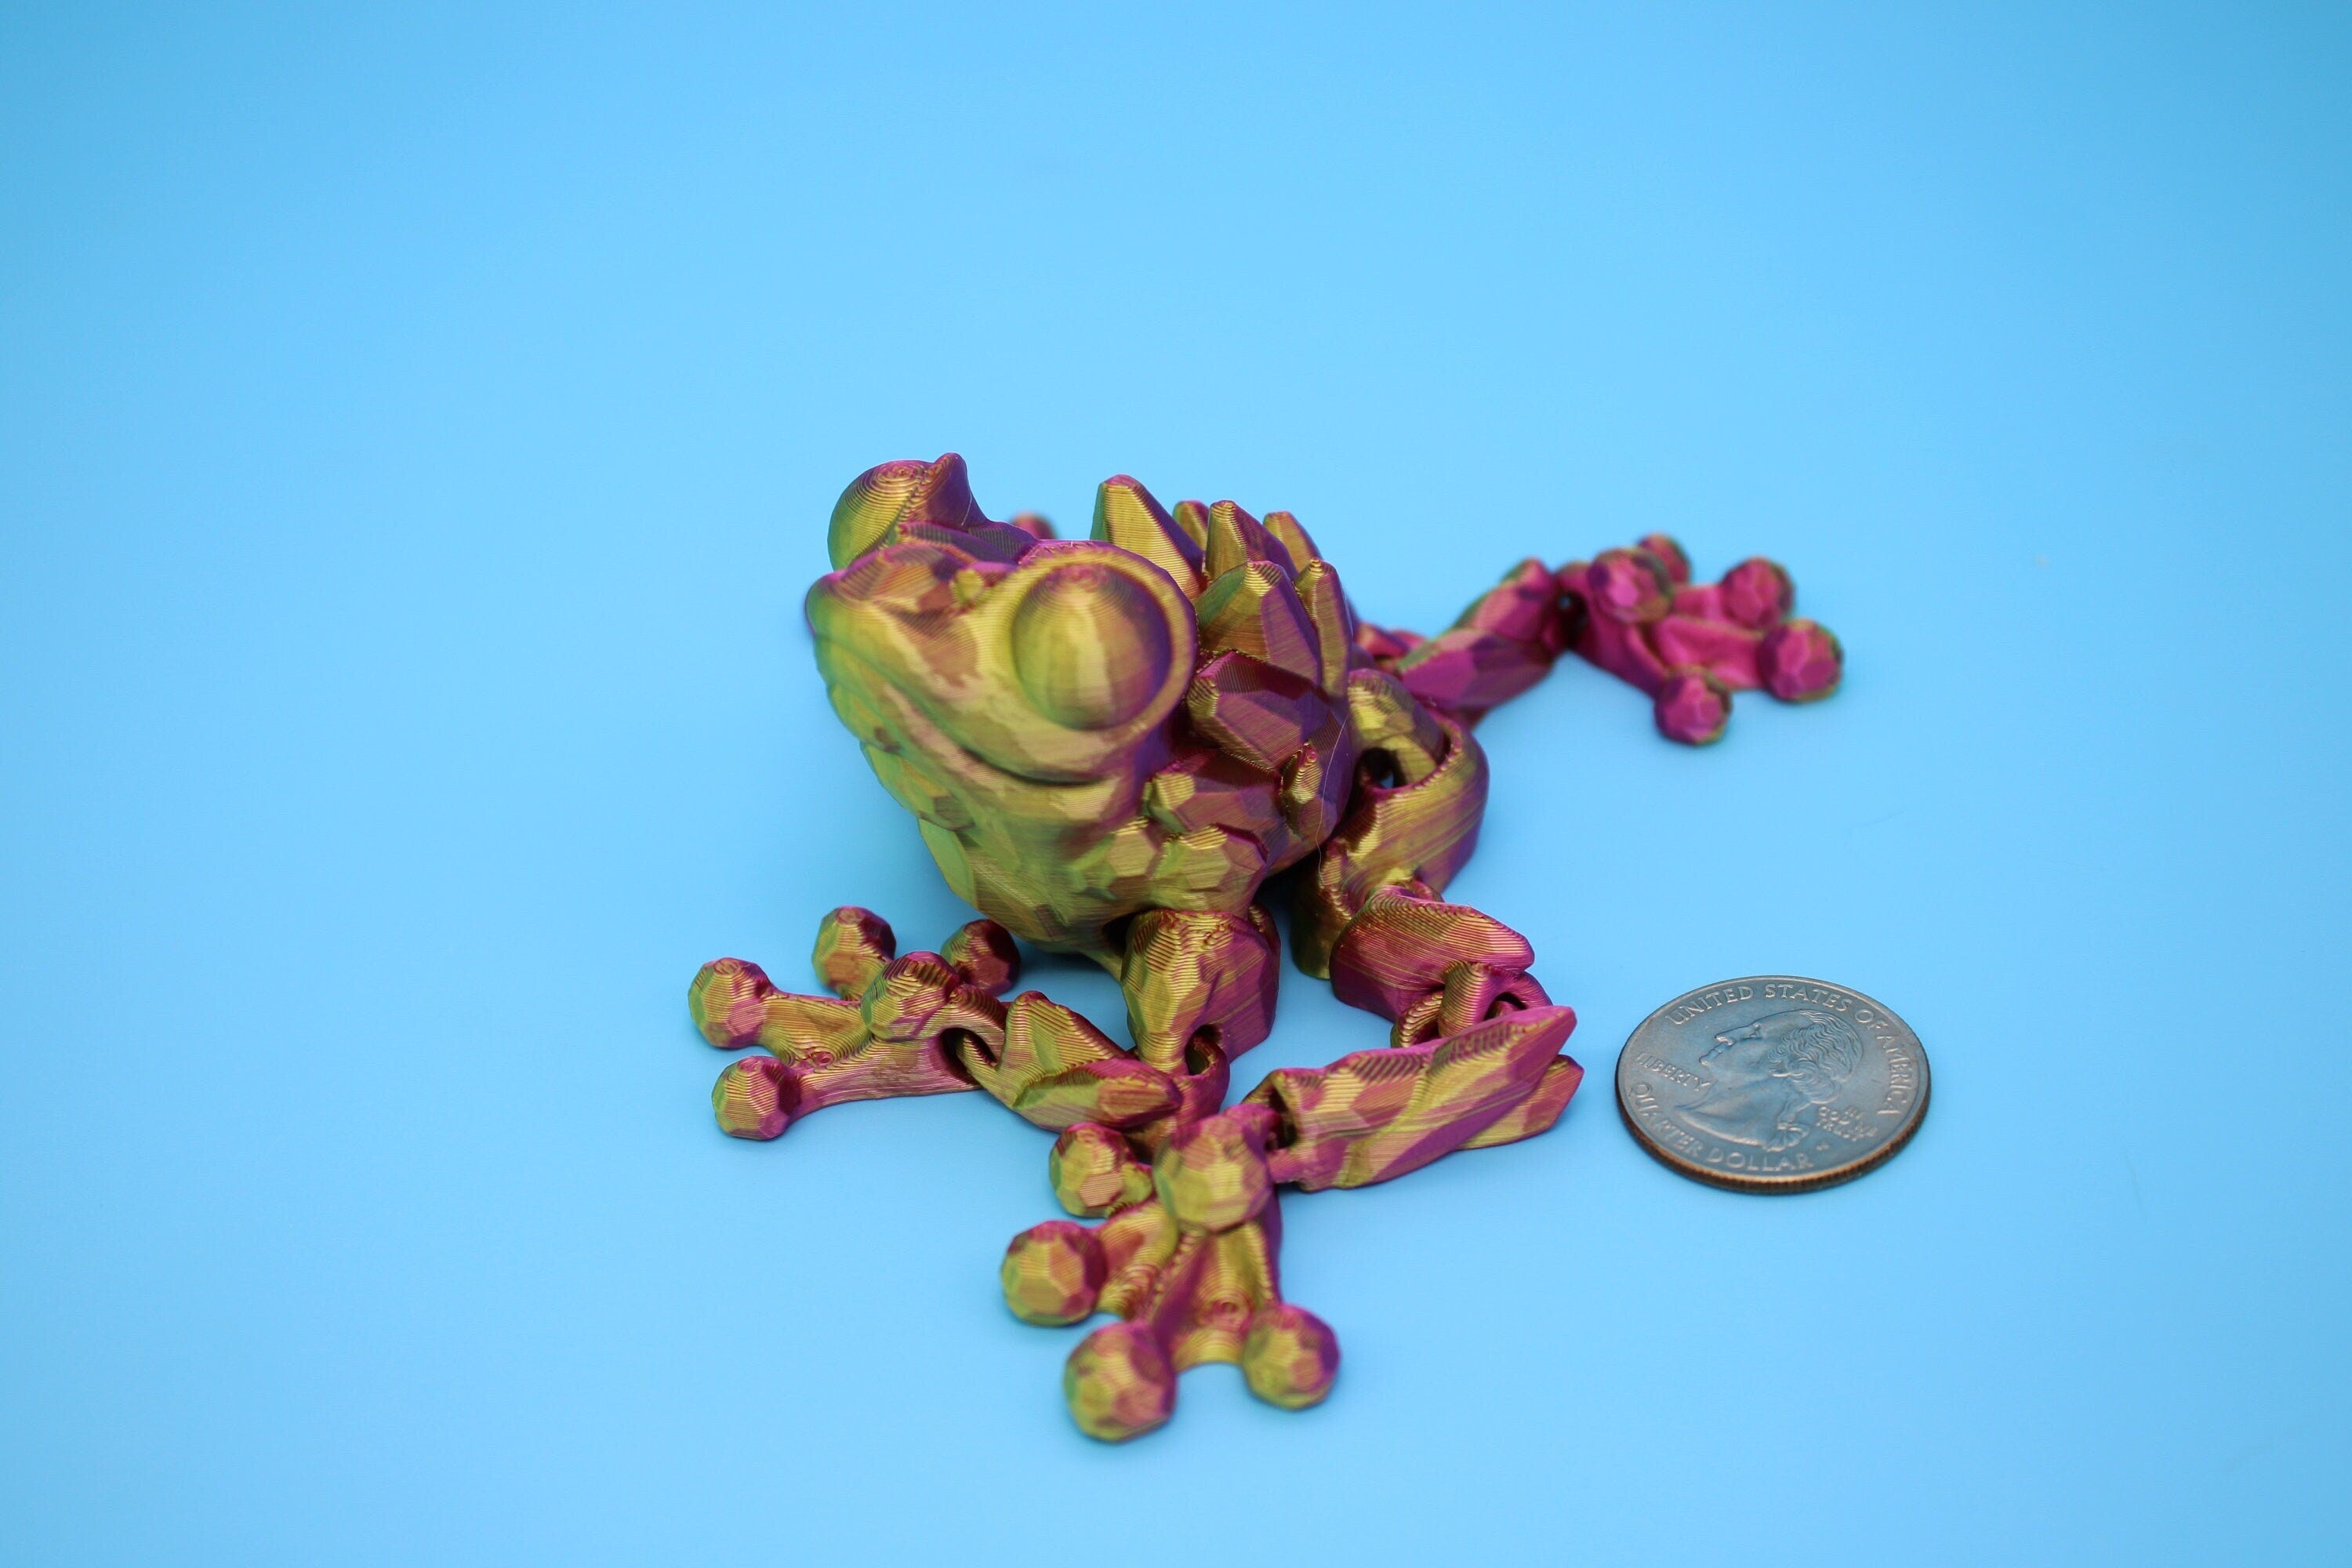 Crystal Frog | 3D Printed Crystal Cute Frog | 5.5 inches | Friendly Frog | Sensory Toy | Fidget Toy | Articulating Frog | Stim Toy.